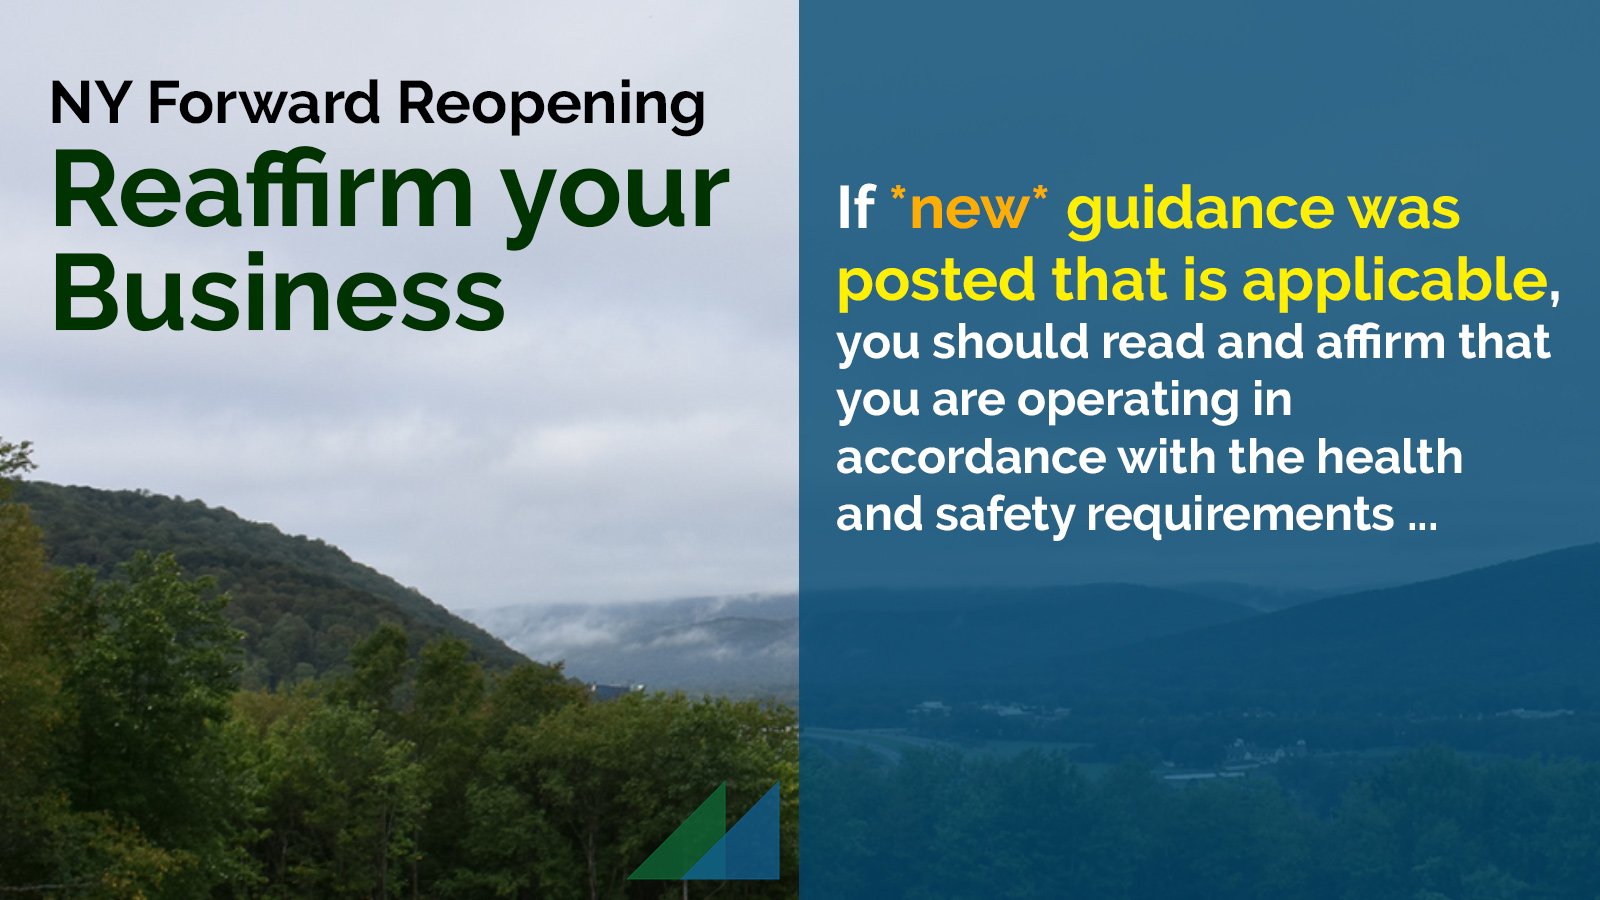 NY Forward Reopening: Reaffirm your Business. If *new* guidance was posted that is applicable, you should read and affirm that you are operating in accordance with the health and safety requirements ...